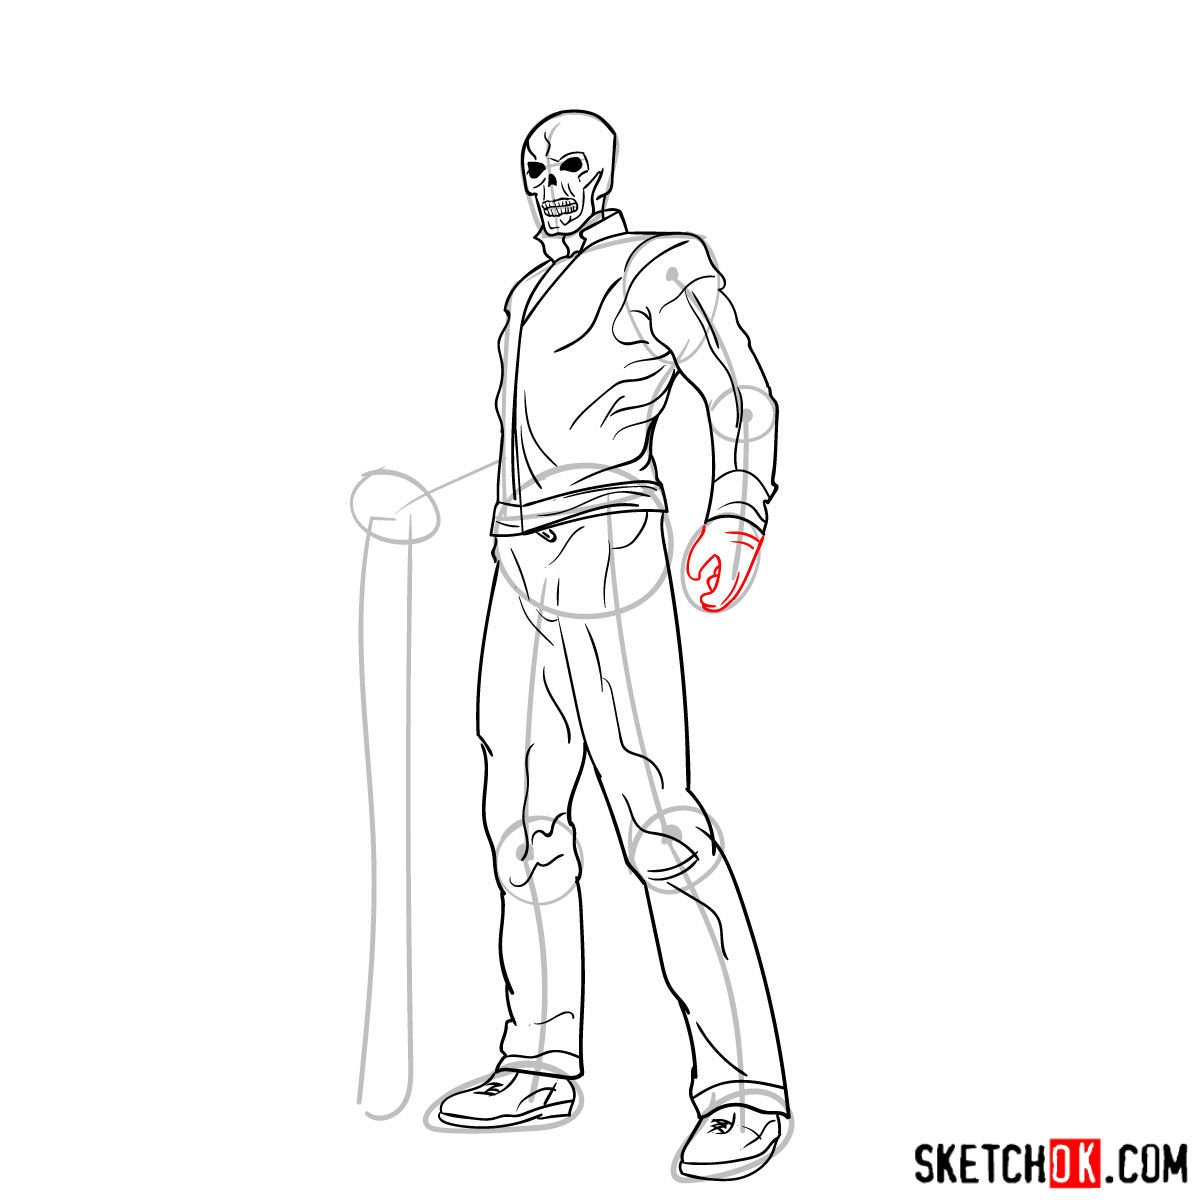 How to draw Ghost Rider with a hellfire chain - step 12